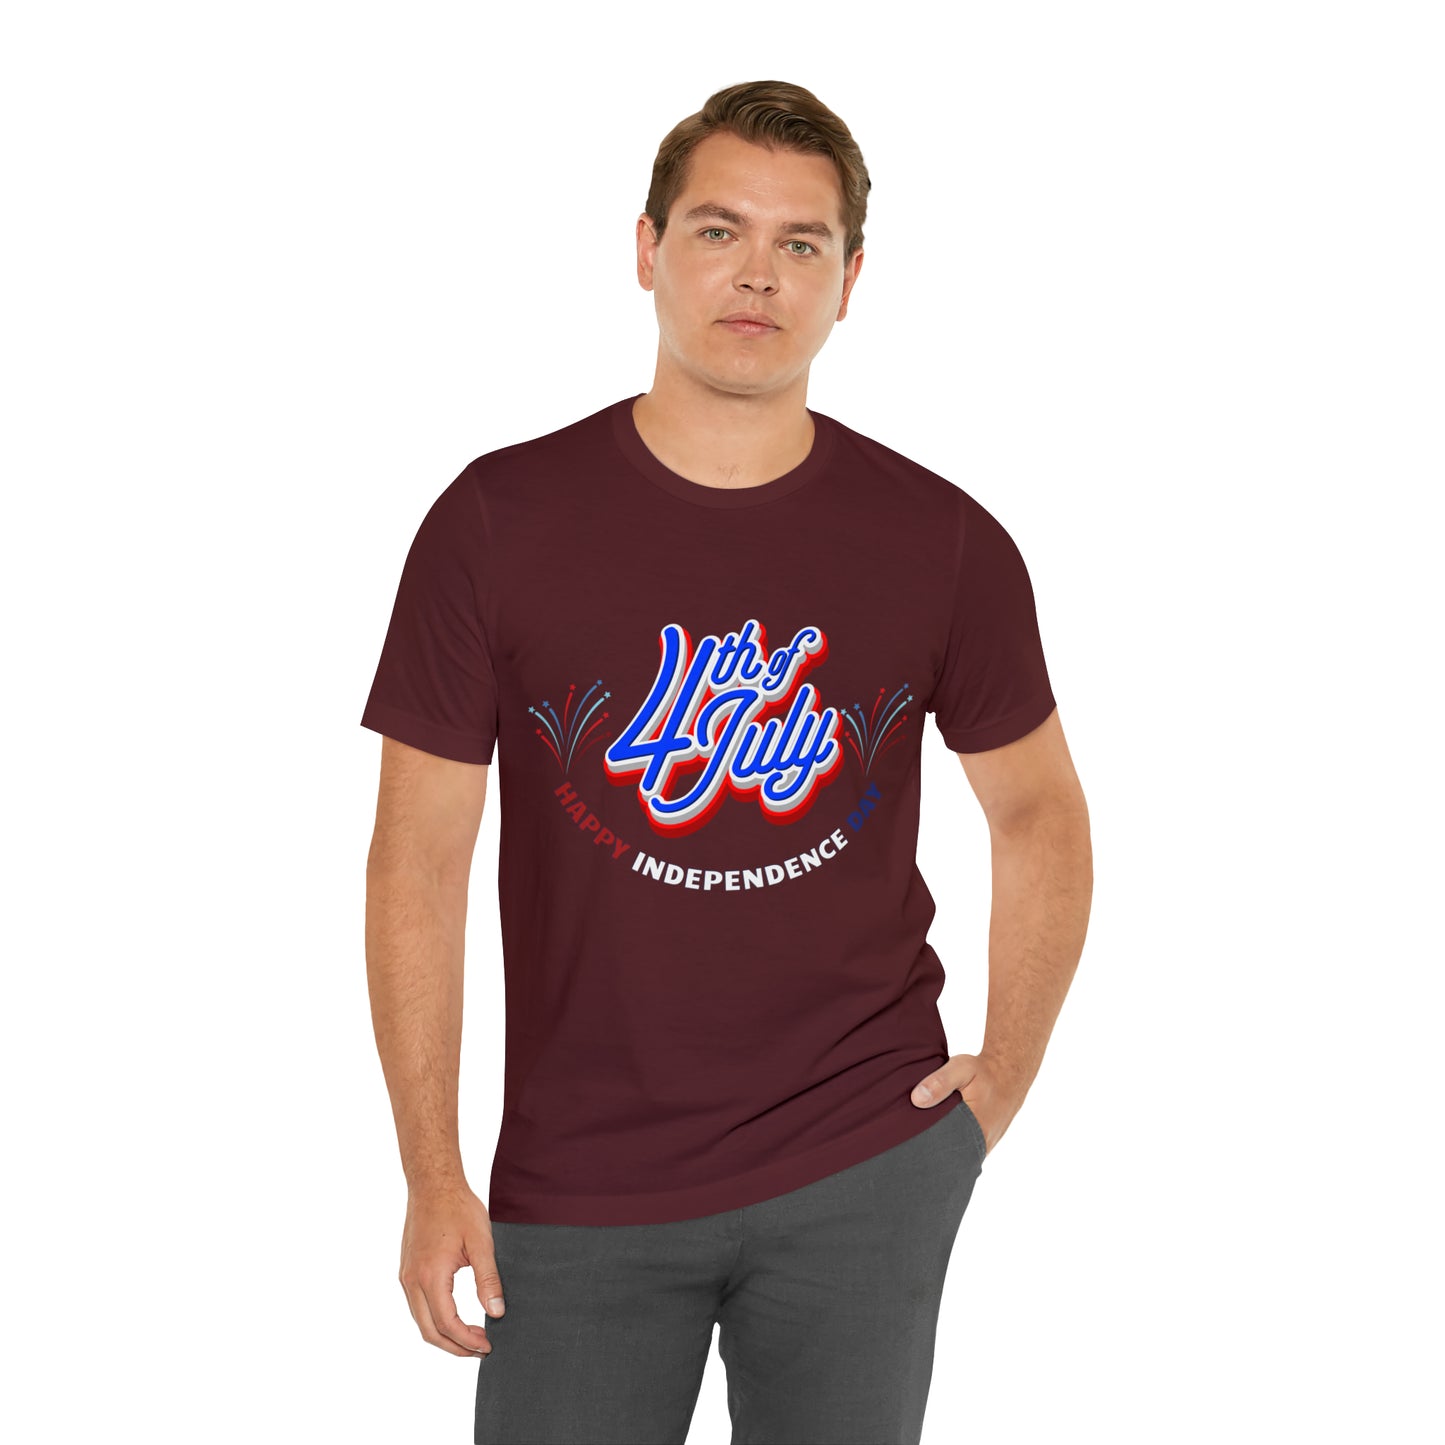 Celebrate Freedom with Patriotic Shirts: Happy Independence Day Shirt for Women and Men, USA Flag, Fireworks, and Freedom-inspired Designs